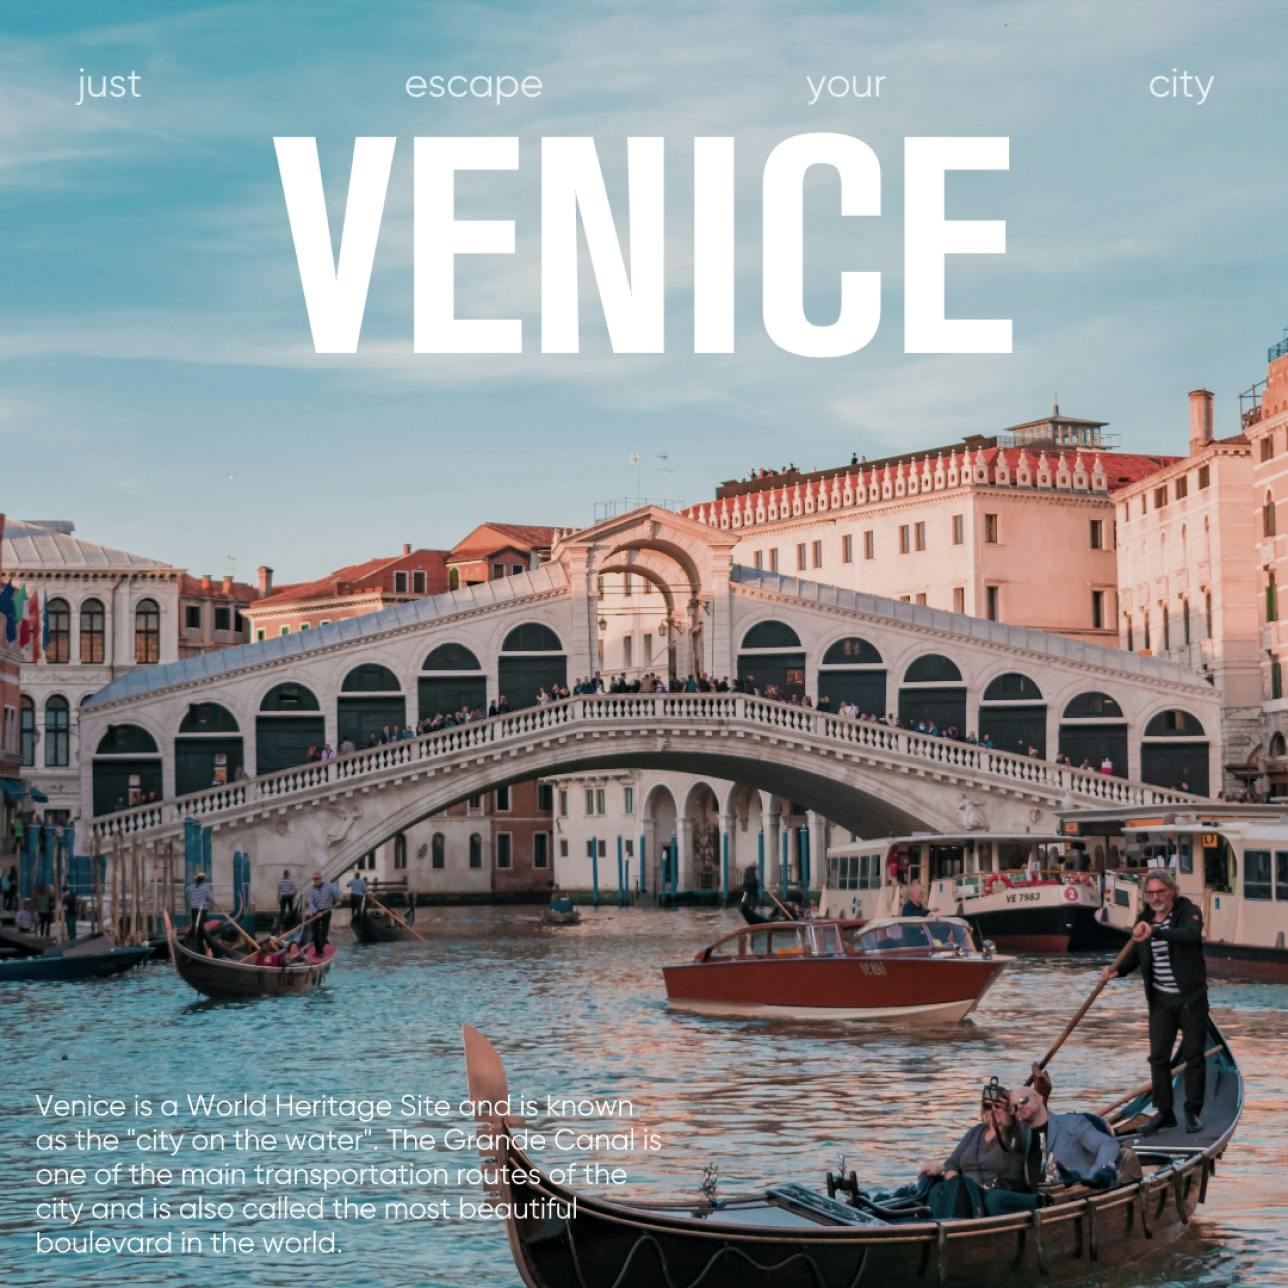 Scavenger hunt through Venice with your phone